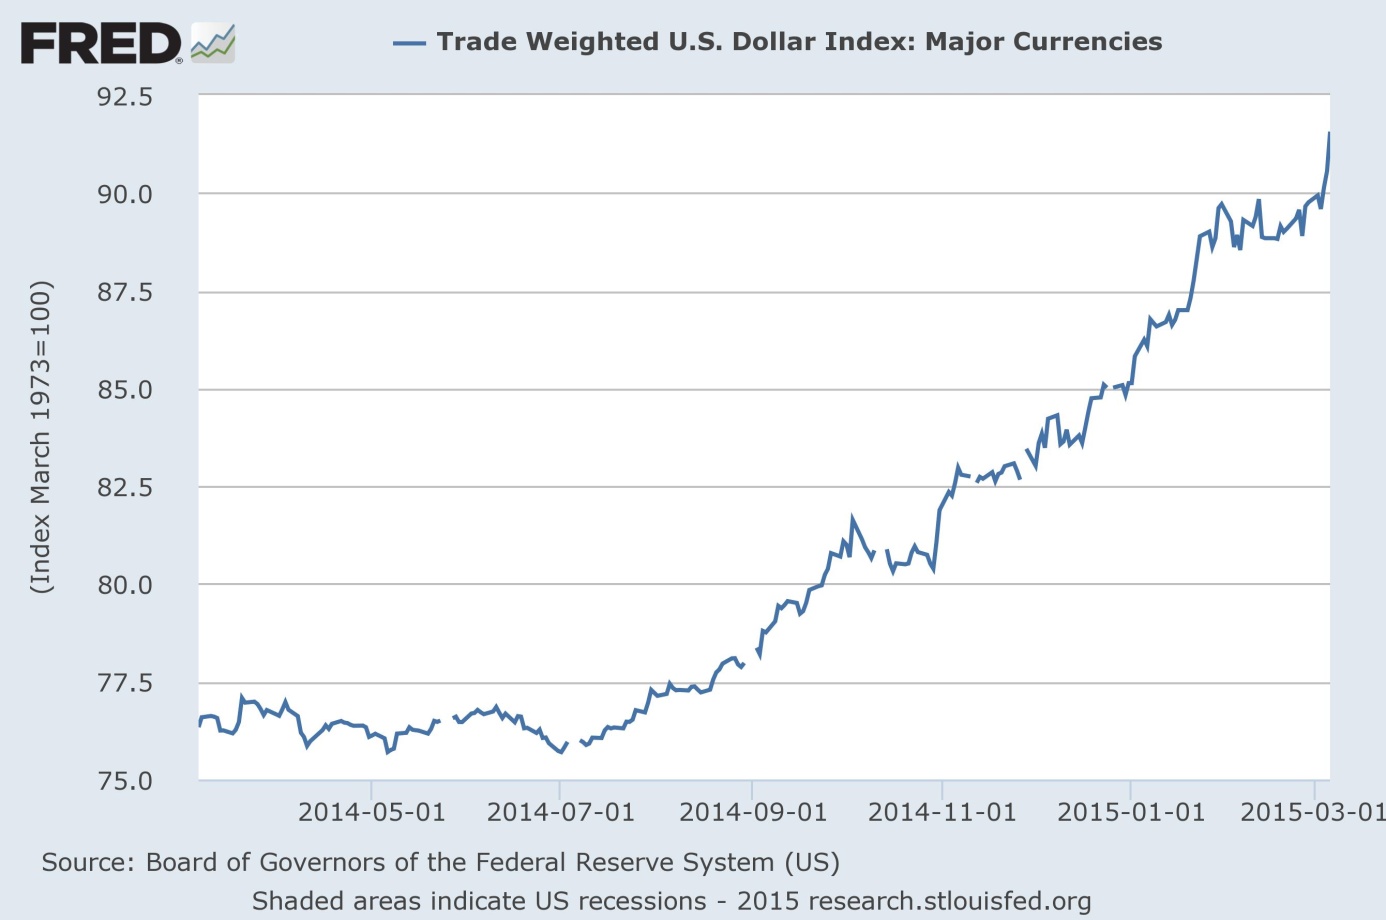 The U.S. Dollar Index (trade weighed, major currencies) in the last year